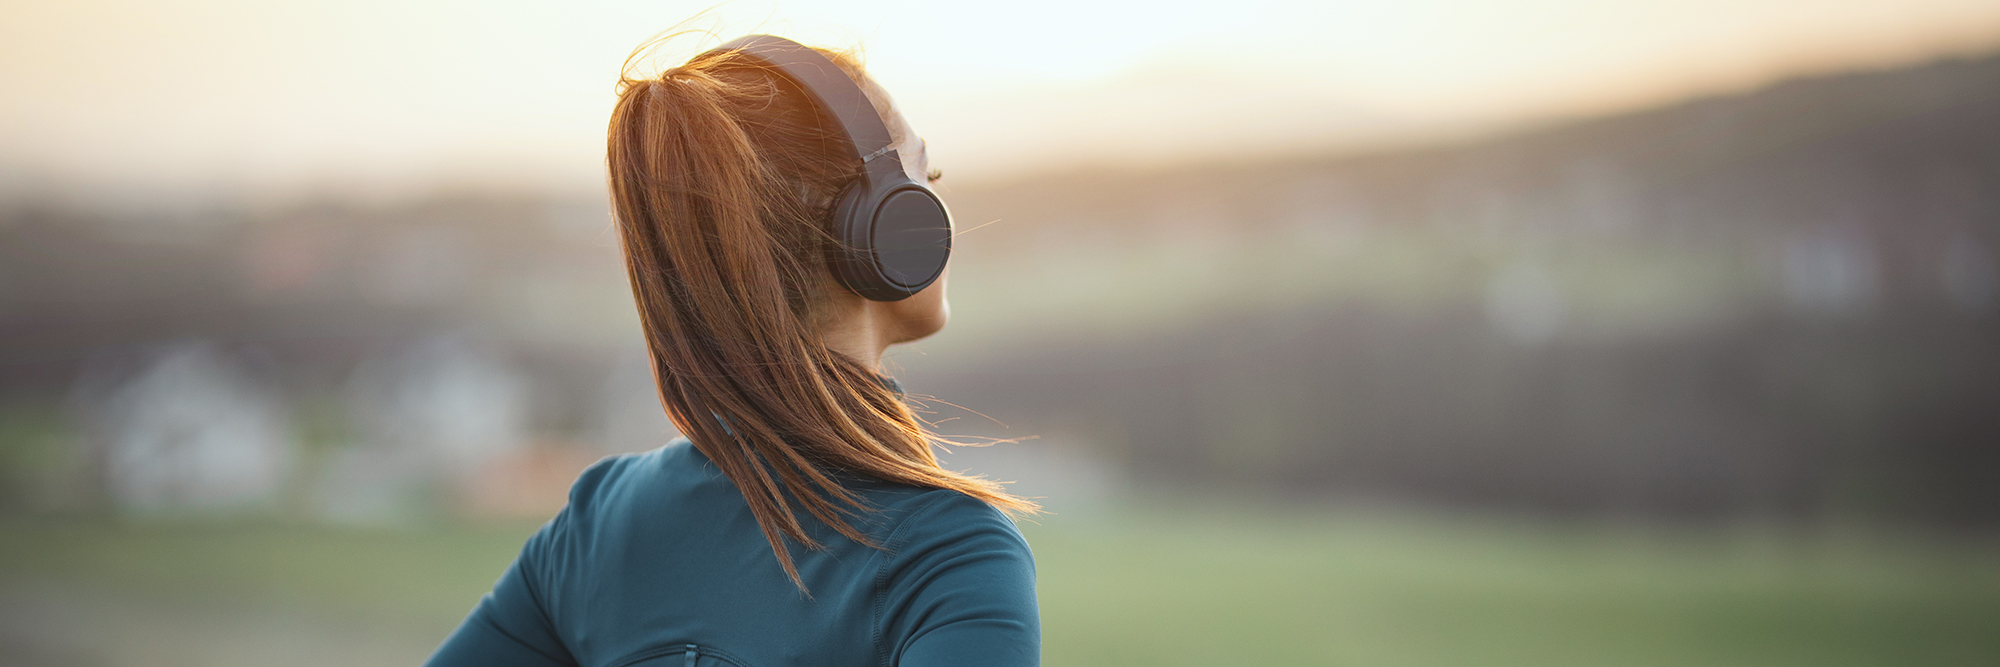 woman wearing headphones looking away from the camera into the field beyond with the sun setting | Digital Wings What is Digital Wellbeing